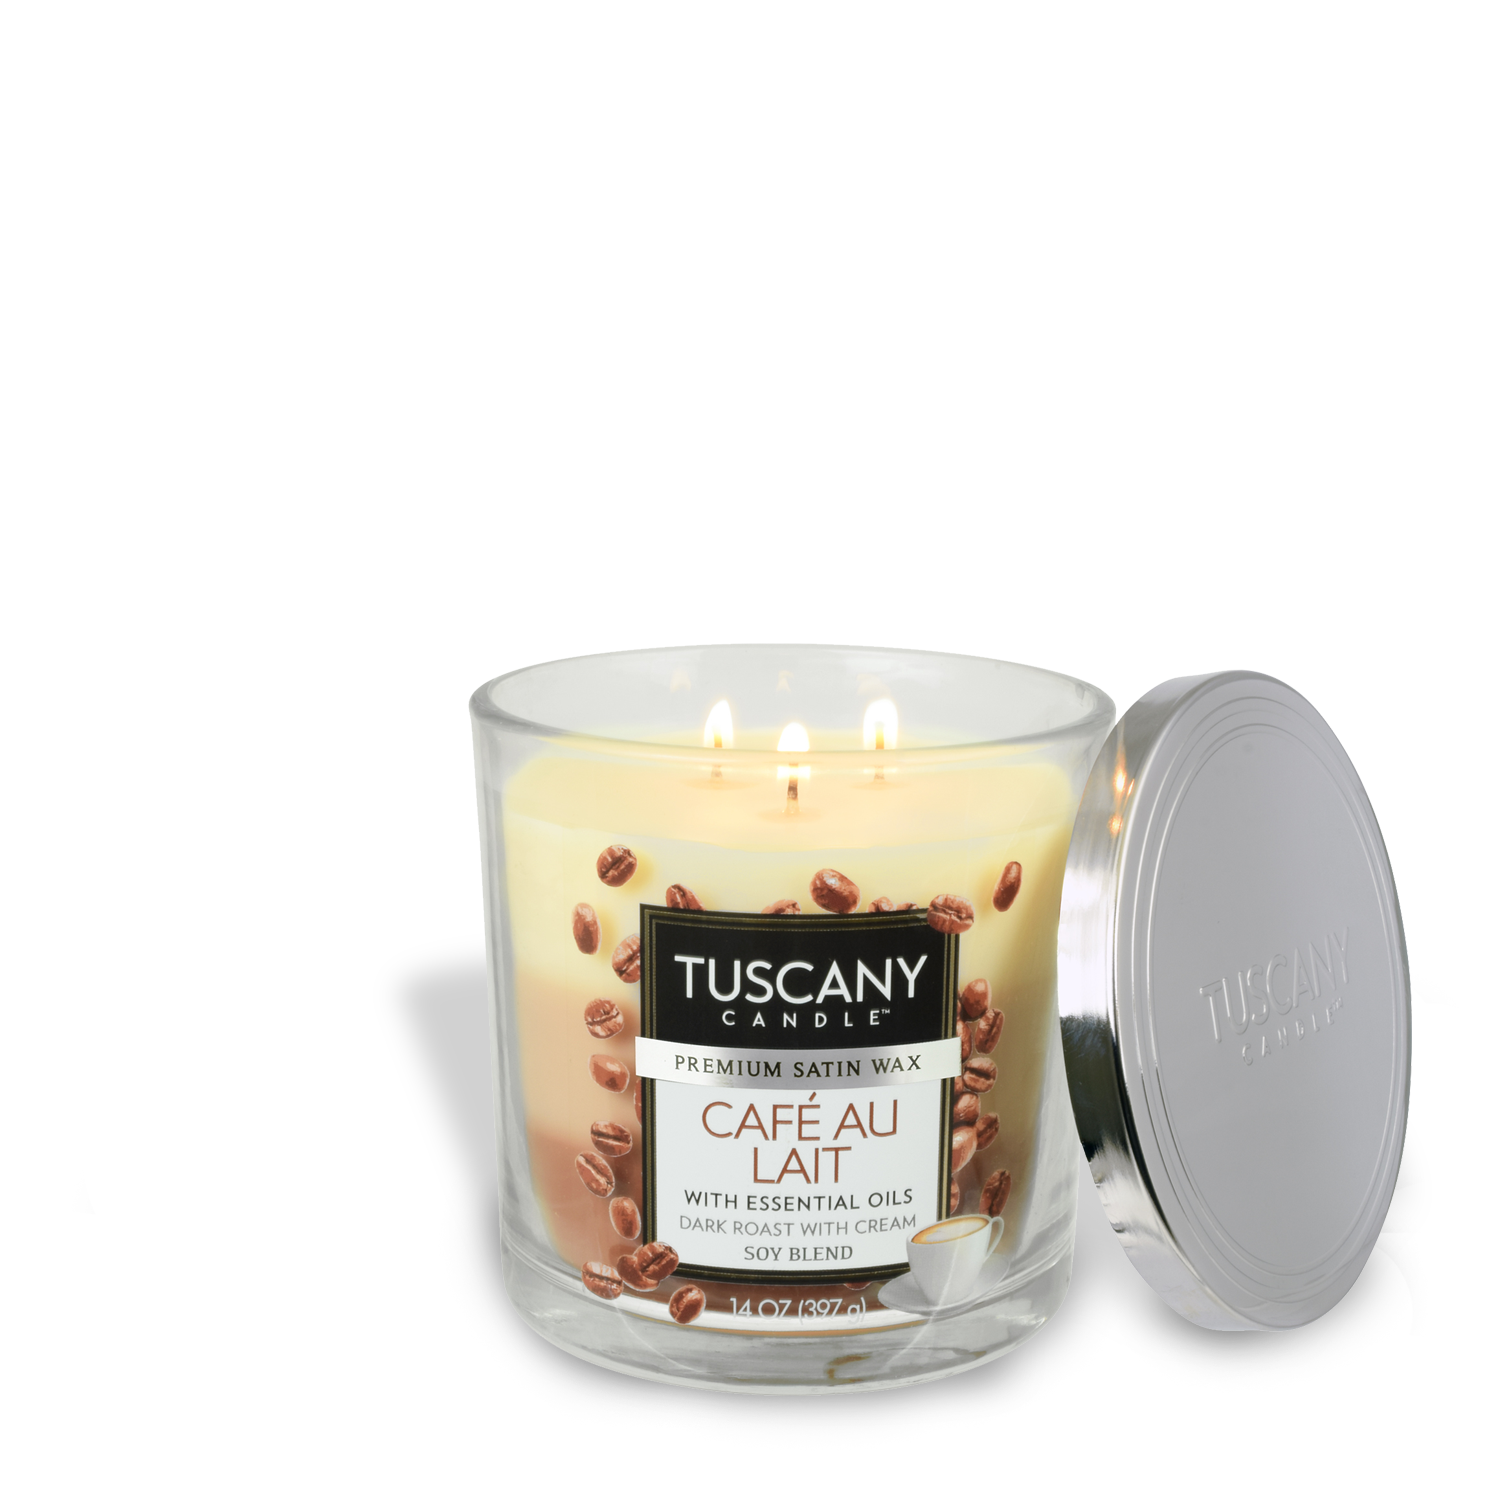 Experience the aroma of freshly brewed Café Au Lait Long-Lasting Scented Jar Candle (14 oz) at our cozy Tuscany coffee shop.